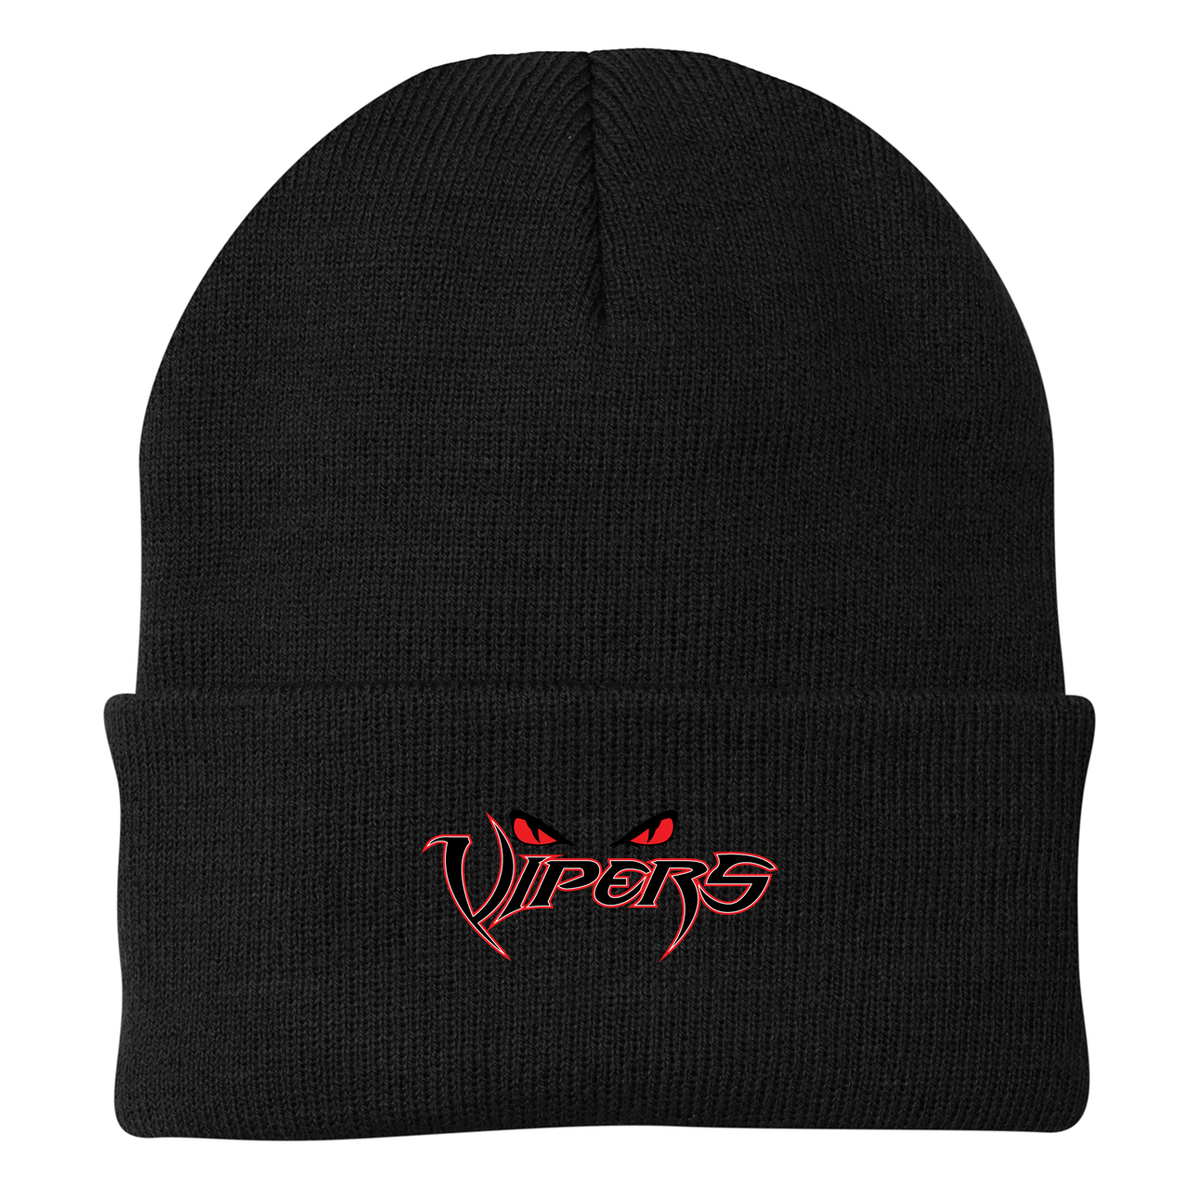 Vipers Knit Beanie